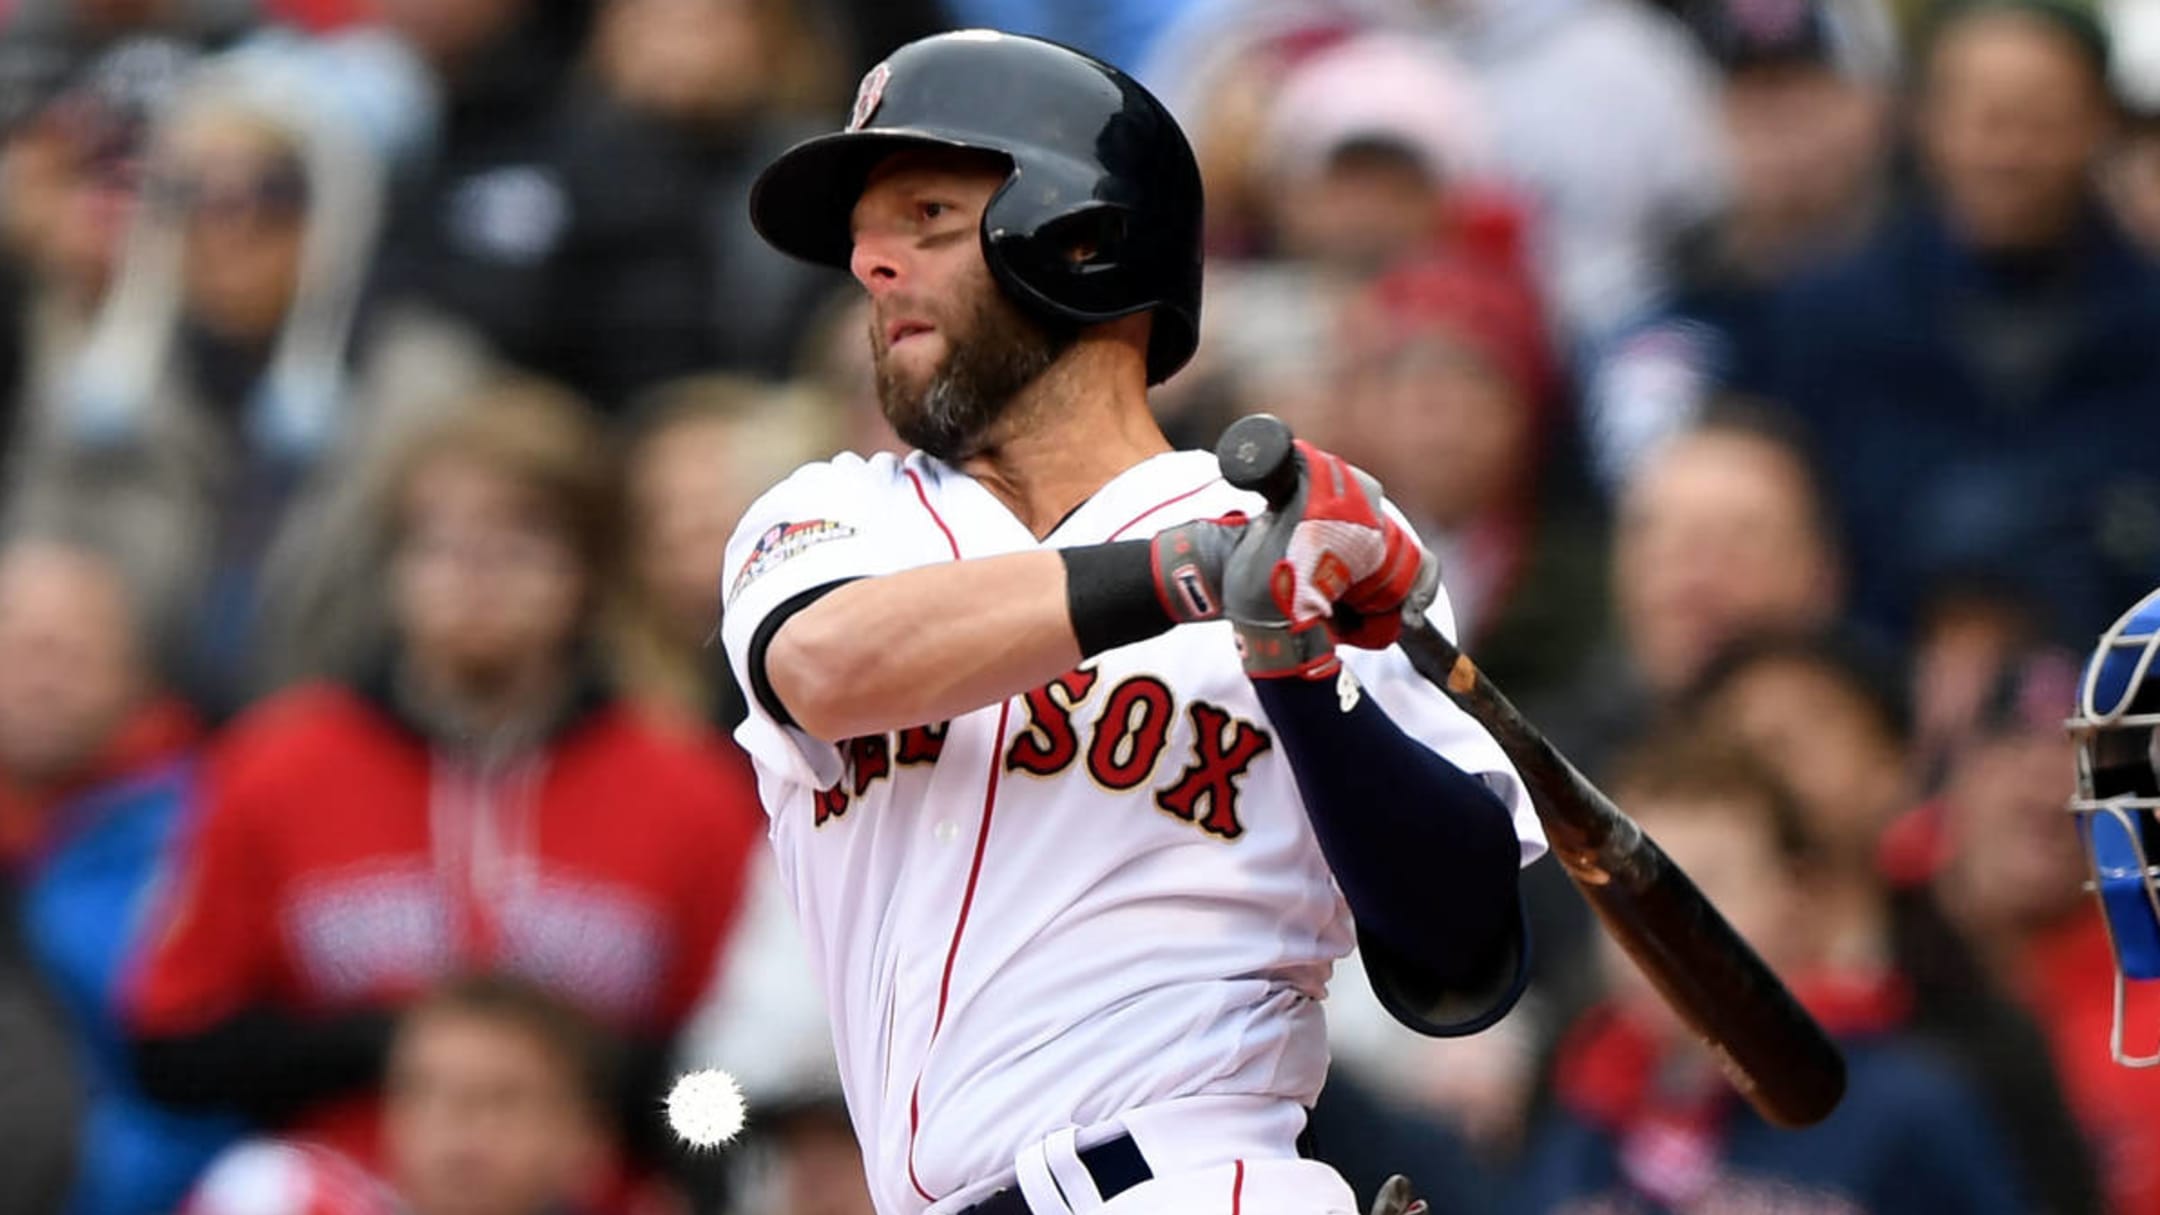 Dustin Pedroia, Red Sox second baseman and 2008 AL MVP, retires